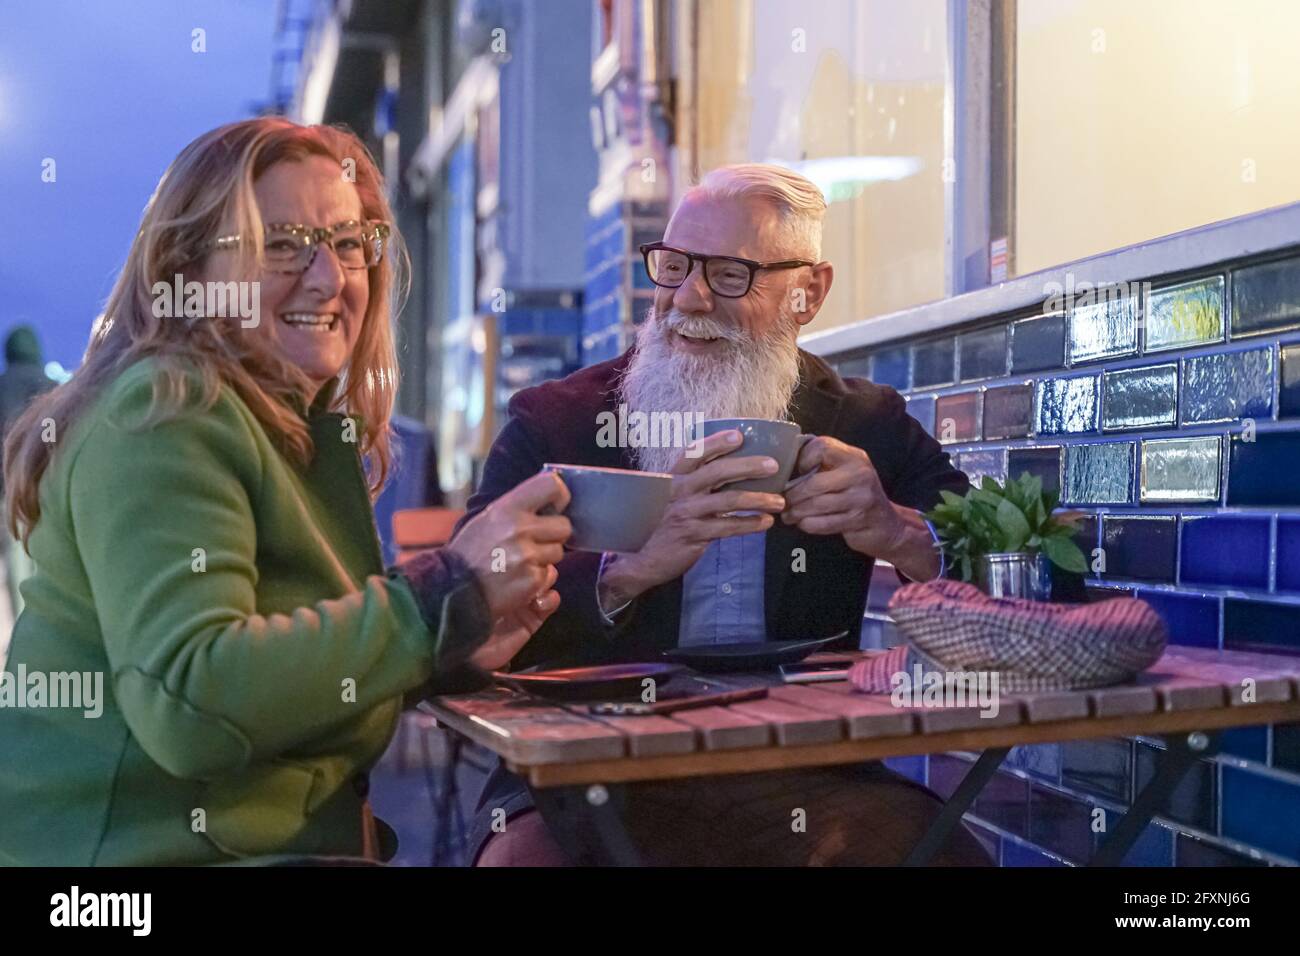 Senior couple having fun drinking at coffee bar on traveling. Mature man and woman wife on active elderly vacation. Happy retirement concept with reti Stock Photo